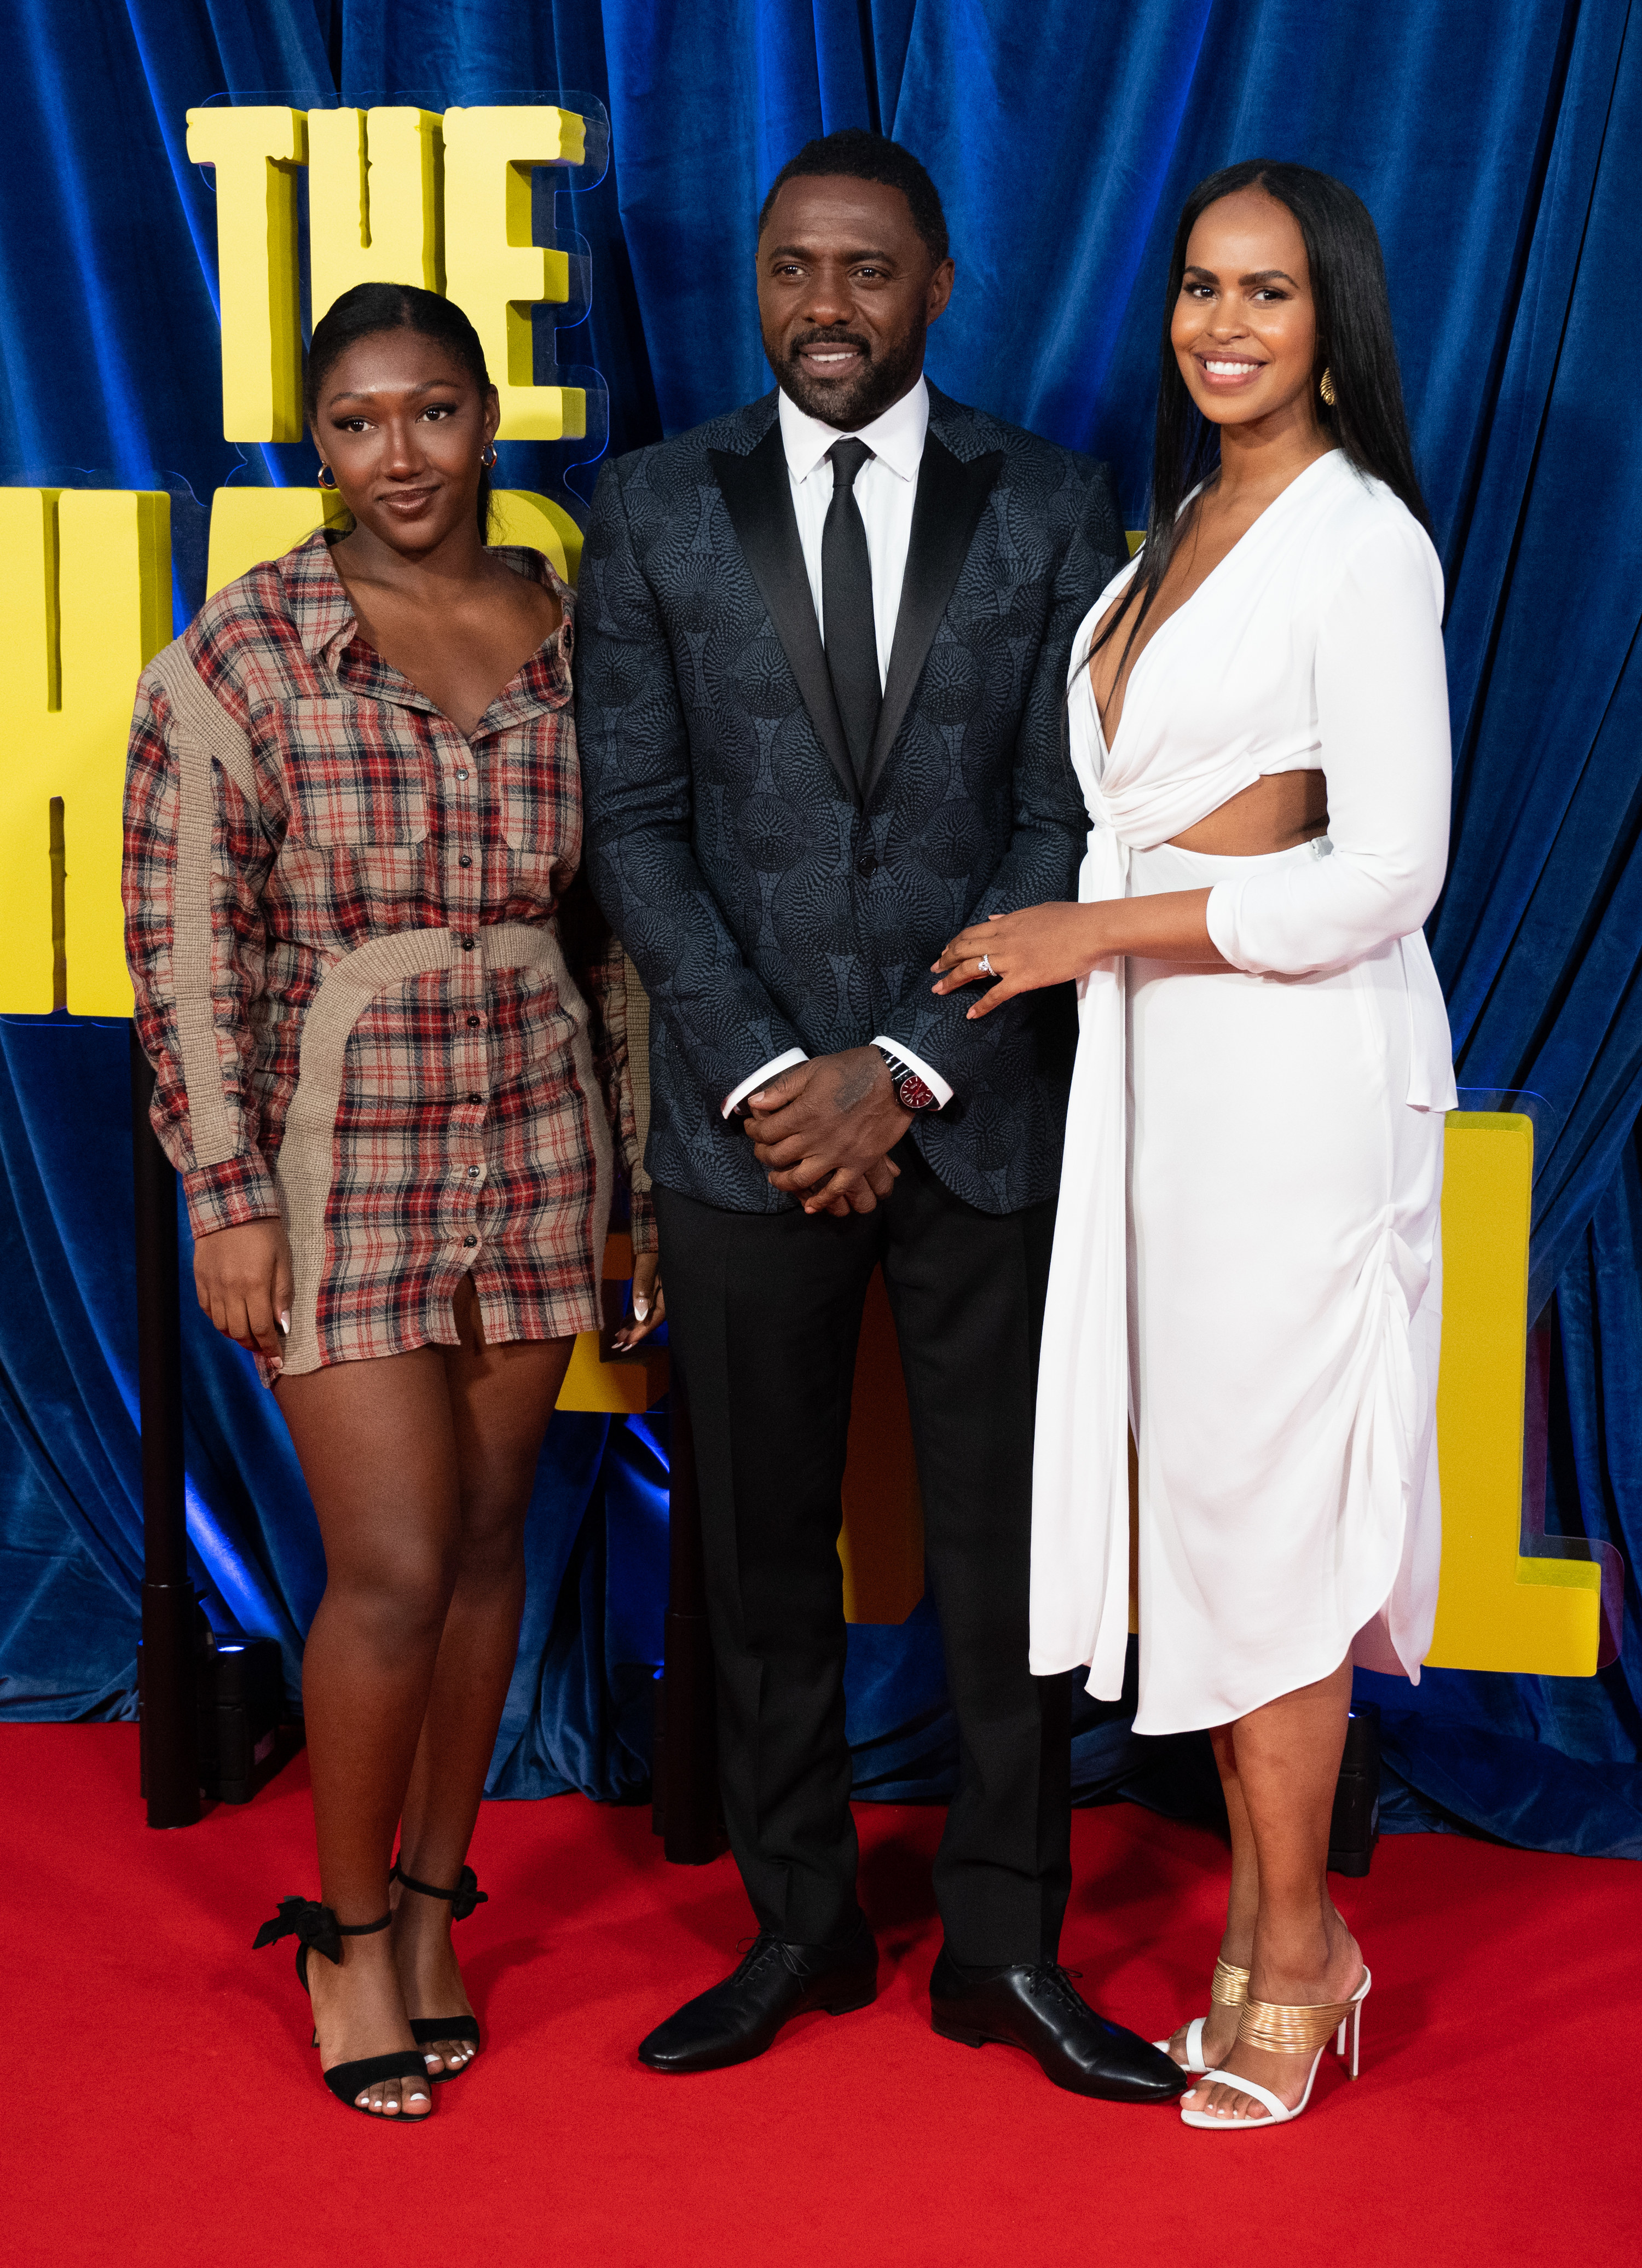 Idris posing on the red carpet with his wife and daughter